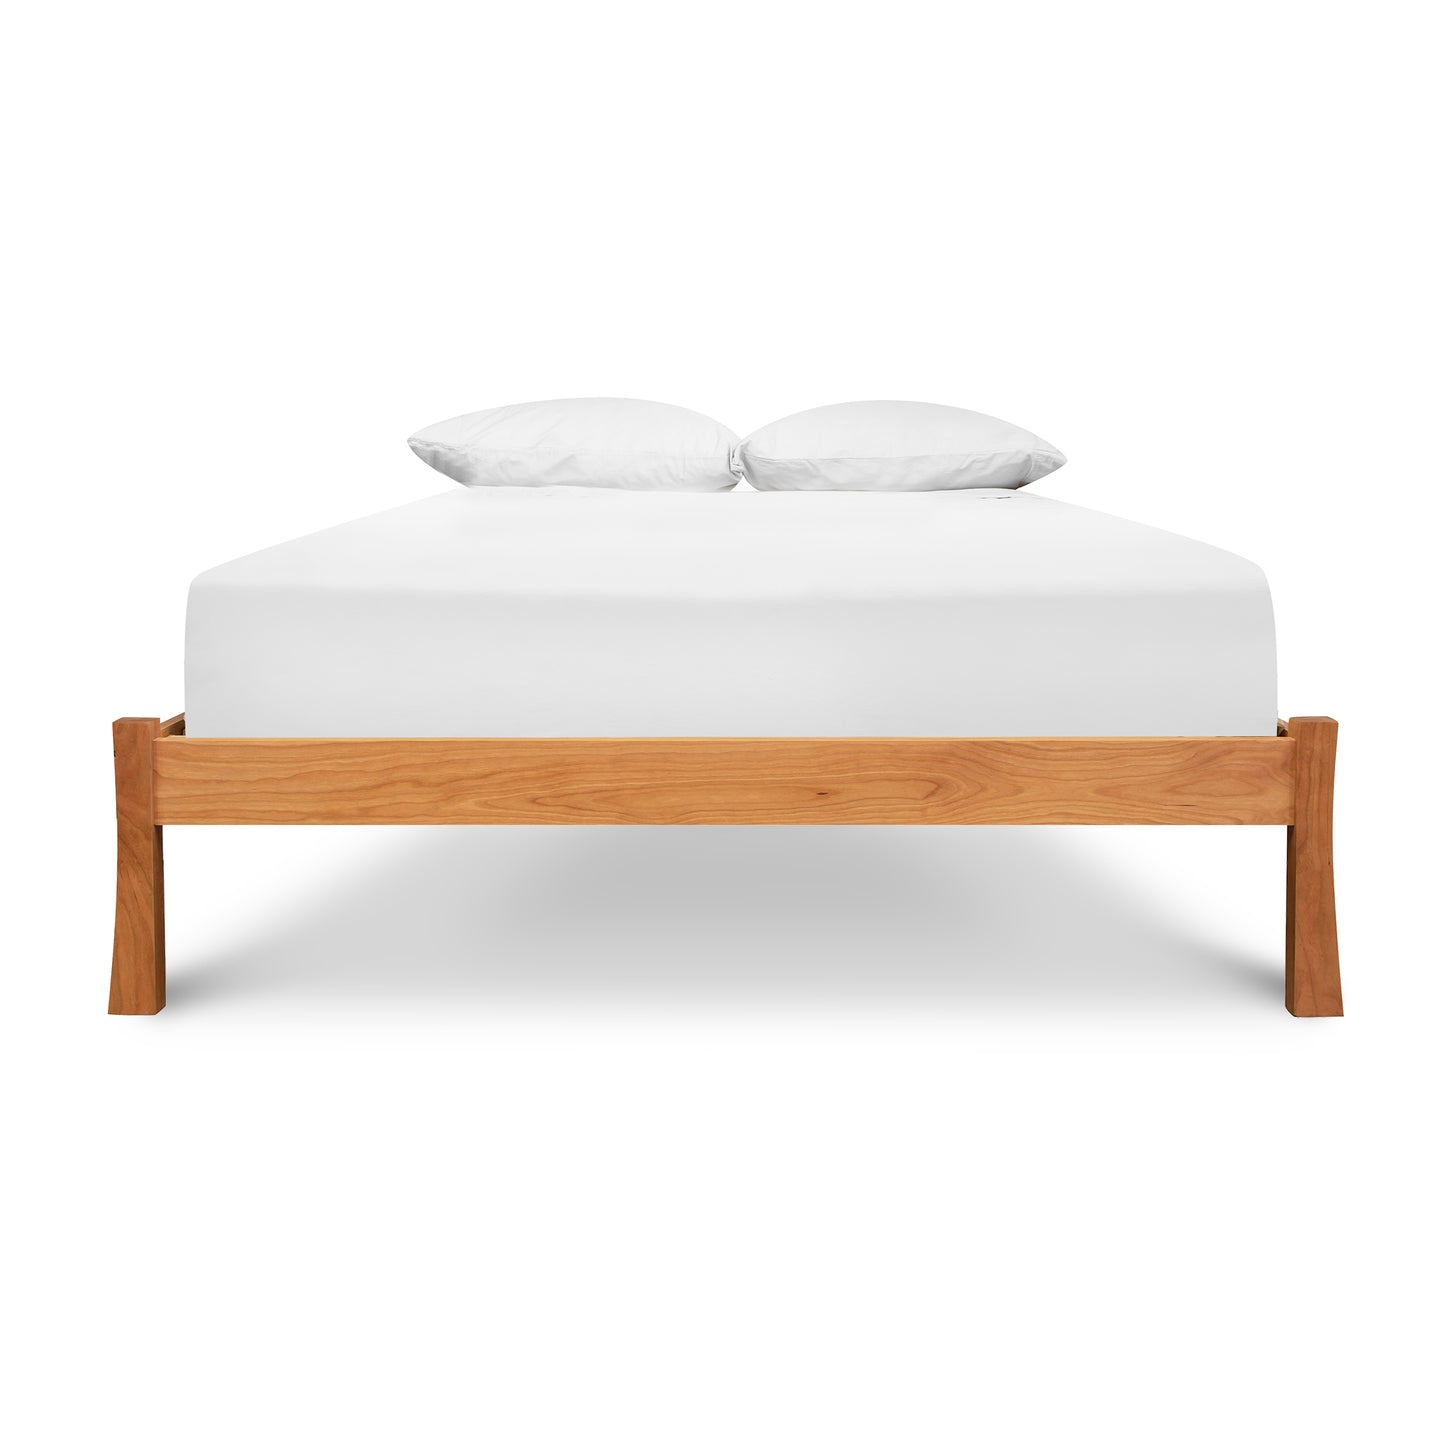 A Vermont Furniture Designs Contemporary Craftsman Studio-Style Platform Bed frame made from sustainably sourced hardwood, supporting a mattress covered with a white fitted sheet and two pillows at the head of the bed, isolated on a white